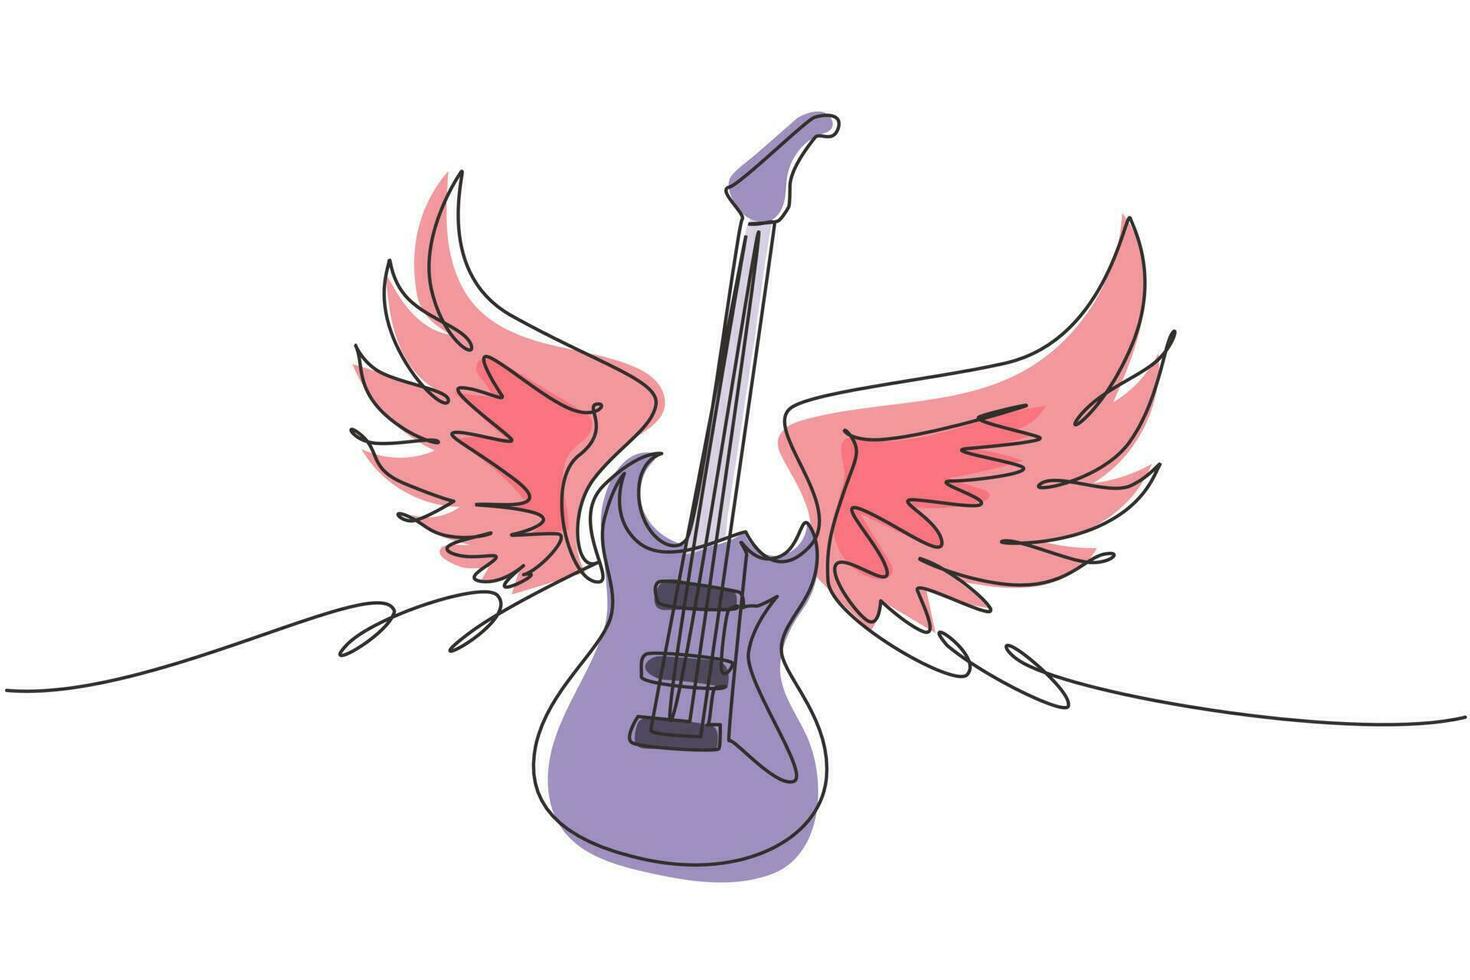 Single one line drawing electric guitar with wings. Vintage label, illustration, logotype. Rock sign, gesture for music festival logo. Modern continuous line draw design graphic vector illustration